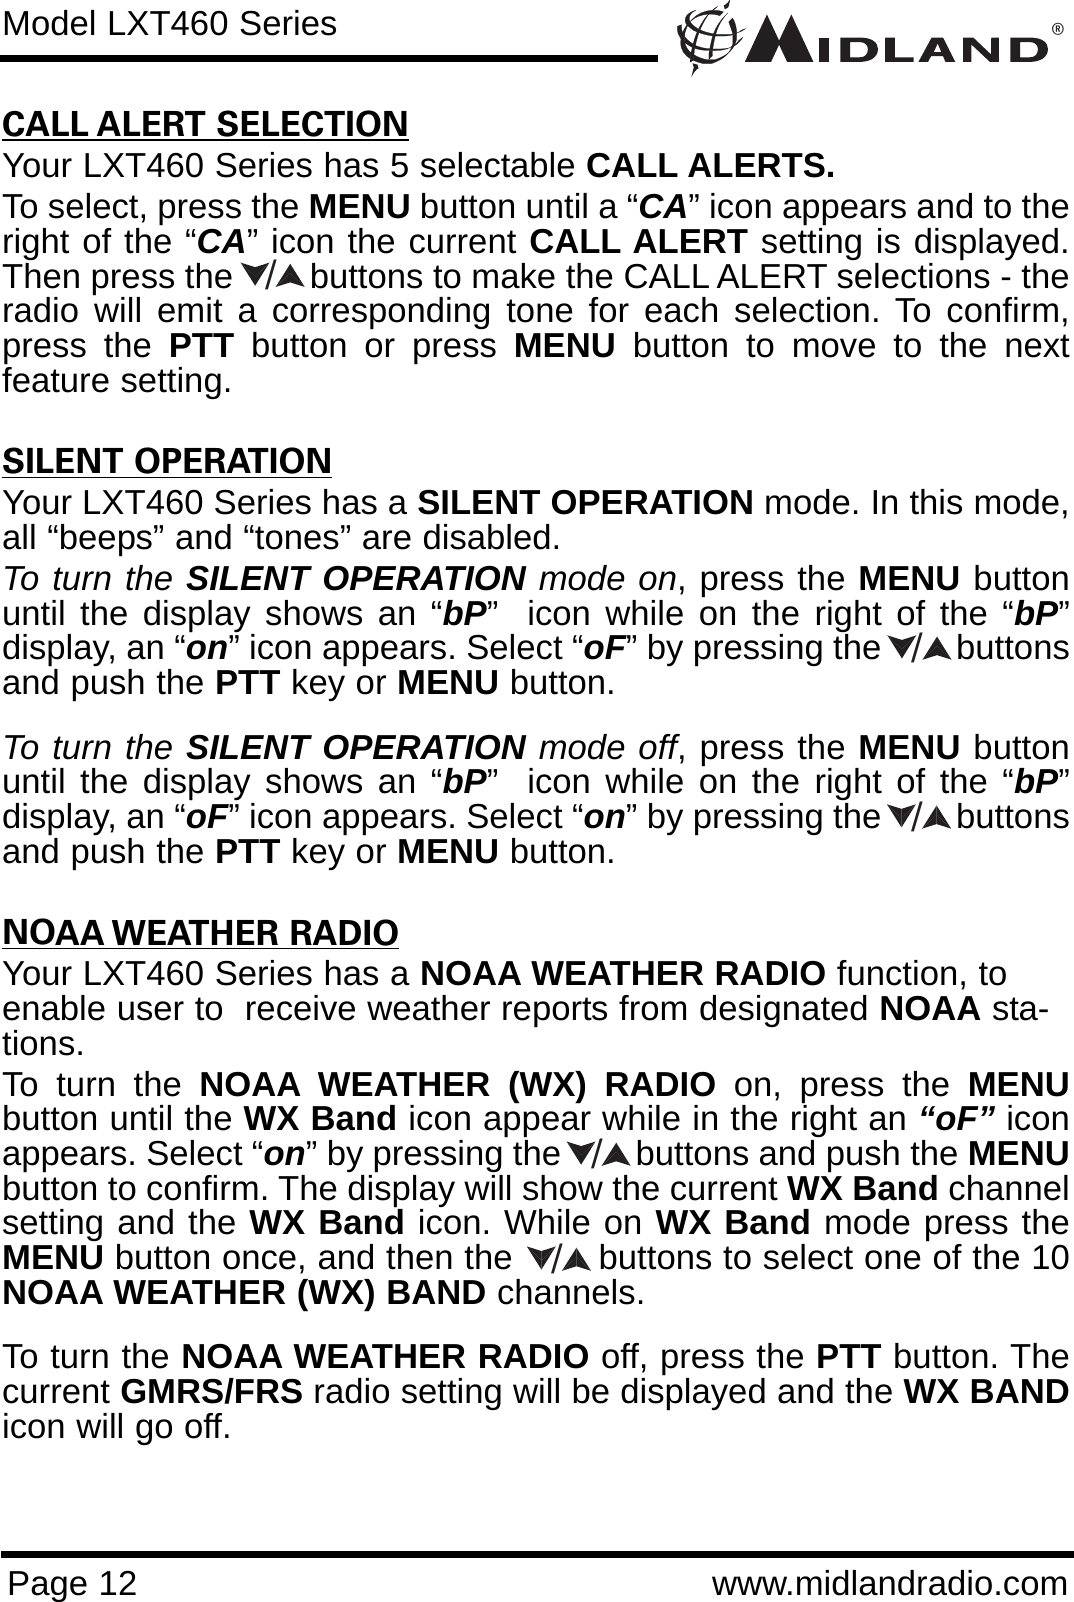 ®Page 12 www.midlandradio.comCALL ALERT SELECTIONYour LXT460 Series has 5 selectable CALL ALERTS.To select, press the MENU button until a “CA” icon appears and to theright of the “CA” icon the current CALL ALERT setting is displayed.Then press the        buttons to make the CALL ALERT selections - theradio will emit a corresponding tone for each selection. To confirm,press the PTT button or press MENU button to move to the nextfeature setting.SILENT OPERATIONYour LXT460 Series has a SILENT OPERATION mode. In this mode,all “beeps” and “tones” are disabled. To turn the SILENT OPERATION mode on, press the MENU buttonuntil the display shows an “bP”  icon while on the right of the “bP”display, an “on” icon appears. Select “oF” by pressing the        buttonsand push the PTT key or MENU button. To turn the SILENT OPERATION mode off, press the MENU buttonuntil the display shows an “bP”  icon while on the right of the “bP”display, an “oF” icon appears. Select “on” by pressing the        buttonsand push the PTT key or MENU button. NOAA WEATHER RADIOYour LXT460 Series has a NOAA WEATHER RADIO function, toenable user to  receive weather reports from designated NOAA sta-tions.To turn the NOAA WEATHER (WX) RADIO on, press the MENUbutton until the WX Band icon appear while in the right an “oF” iconappears. Select “on” by pressing the        buttons and push the MENUbutton to confirm. The display will show the current WX Band channelsetting and the WX Band icon. While on WX Band mode press theMENU button once, and then the        buttons to select one of the 10NOAA WEATHER (WX) BAND channels.To turn the NOAA WEATHER RADIO off, press the PTT button. Thecurrent GMRS/FRS radio setting will be displayed and the WX BANDicon will go off. Model LXT460 Series/////